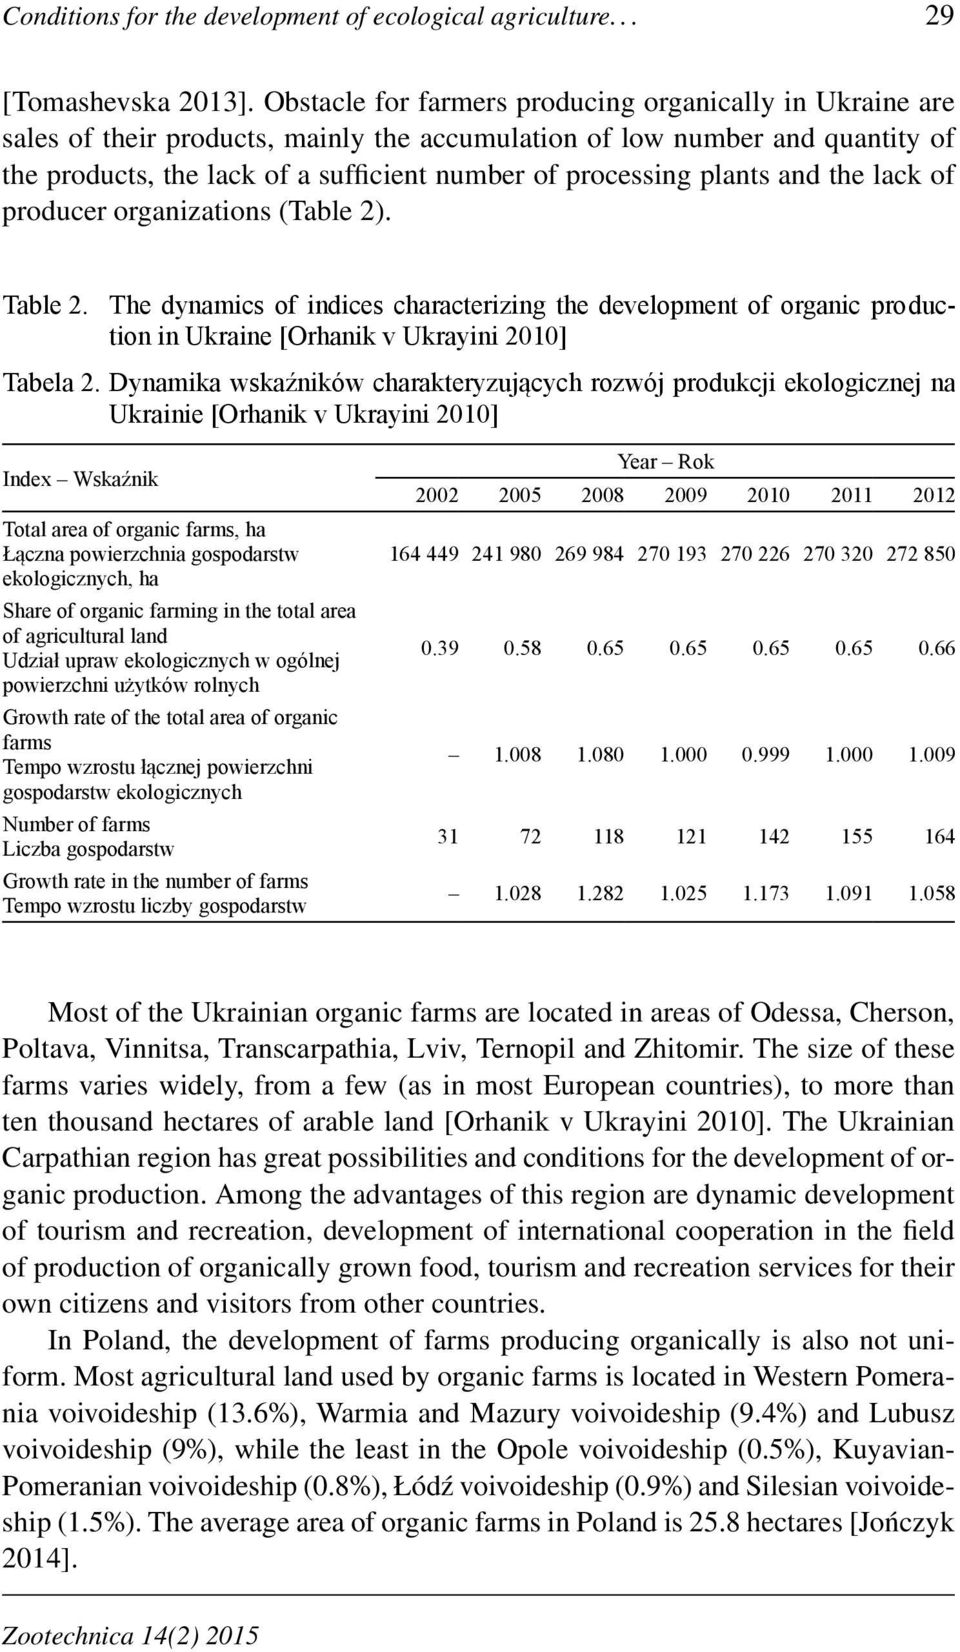 plants and the lack of producer organizations (Table 2). Table 2. The dynamics of indices characterizing the development of organic production in Ukraine [Orhanik v Ukrayini 2010] Tabela 2.